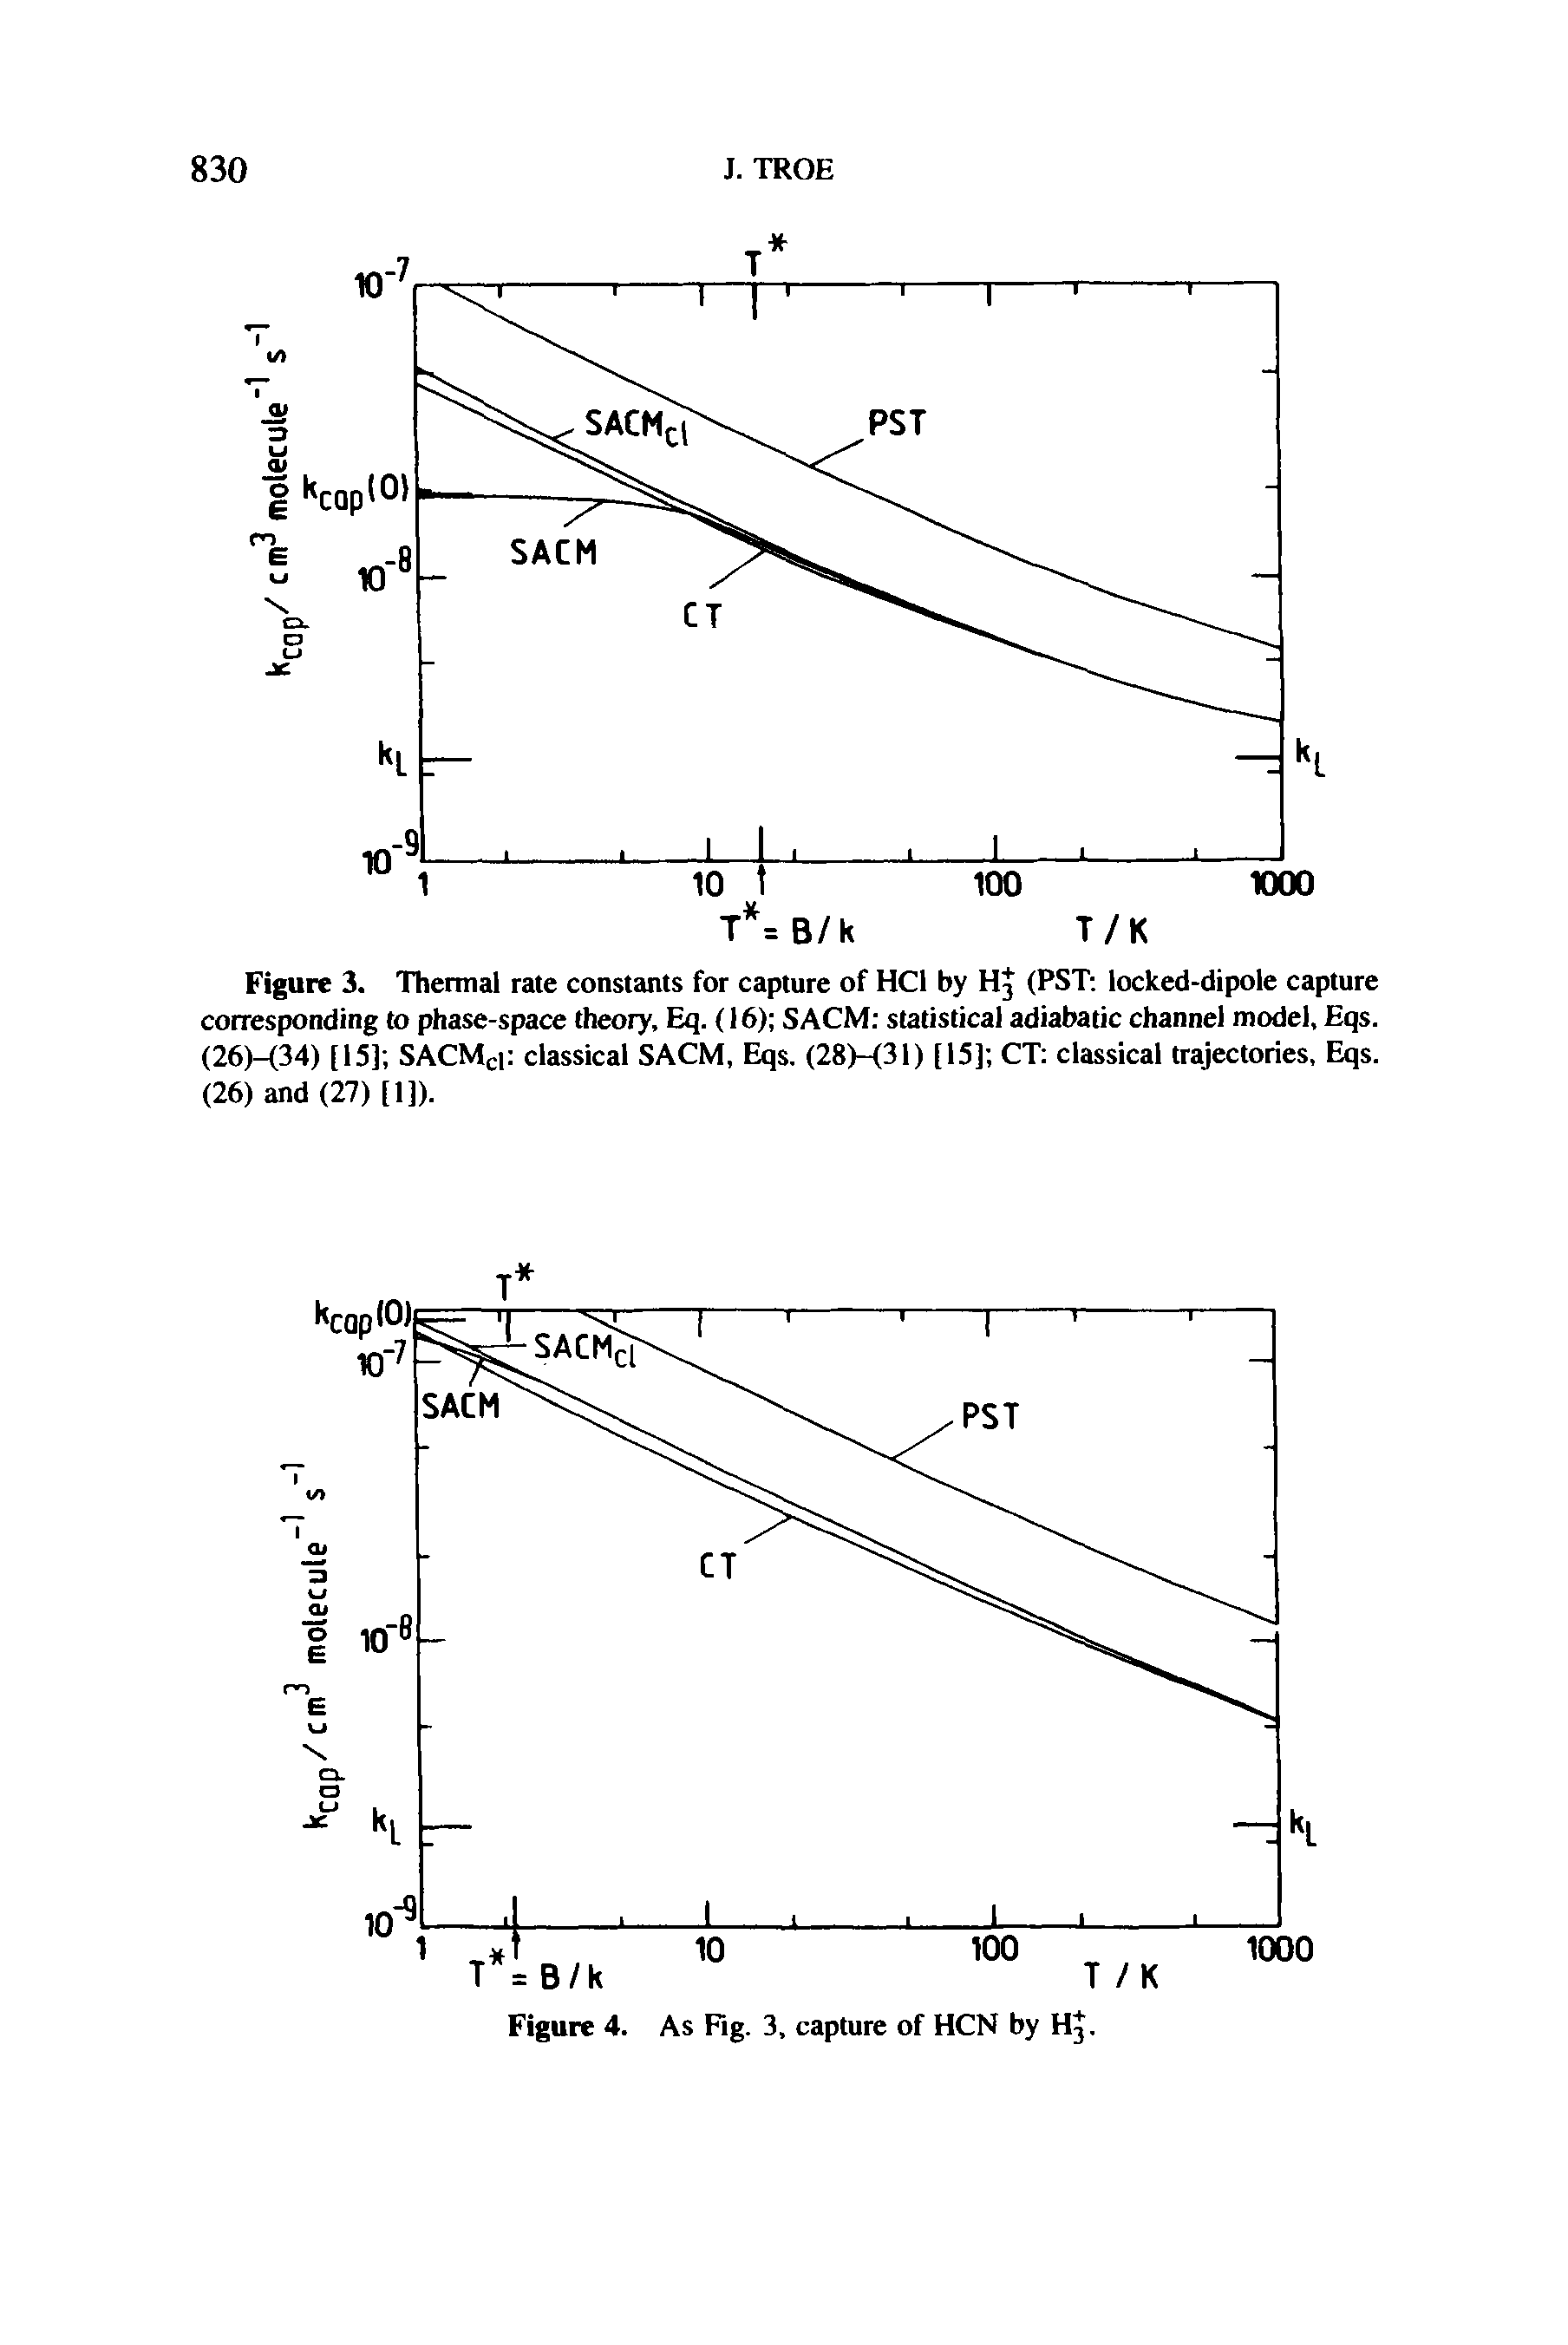 Figure 3. Thermal rate constants for capture of HC1 by H3 (PST locked-dipole capture corresponding to phase-space theory, Eq. (16) SACM statistical adiabatic channel model, Eqs. (26)-(34) [15] SACMci classical SACM, Eqs. (28H31) [15] CT classical trajectories, Eqs. (26) and (27) [1]).